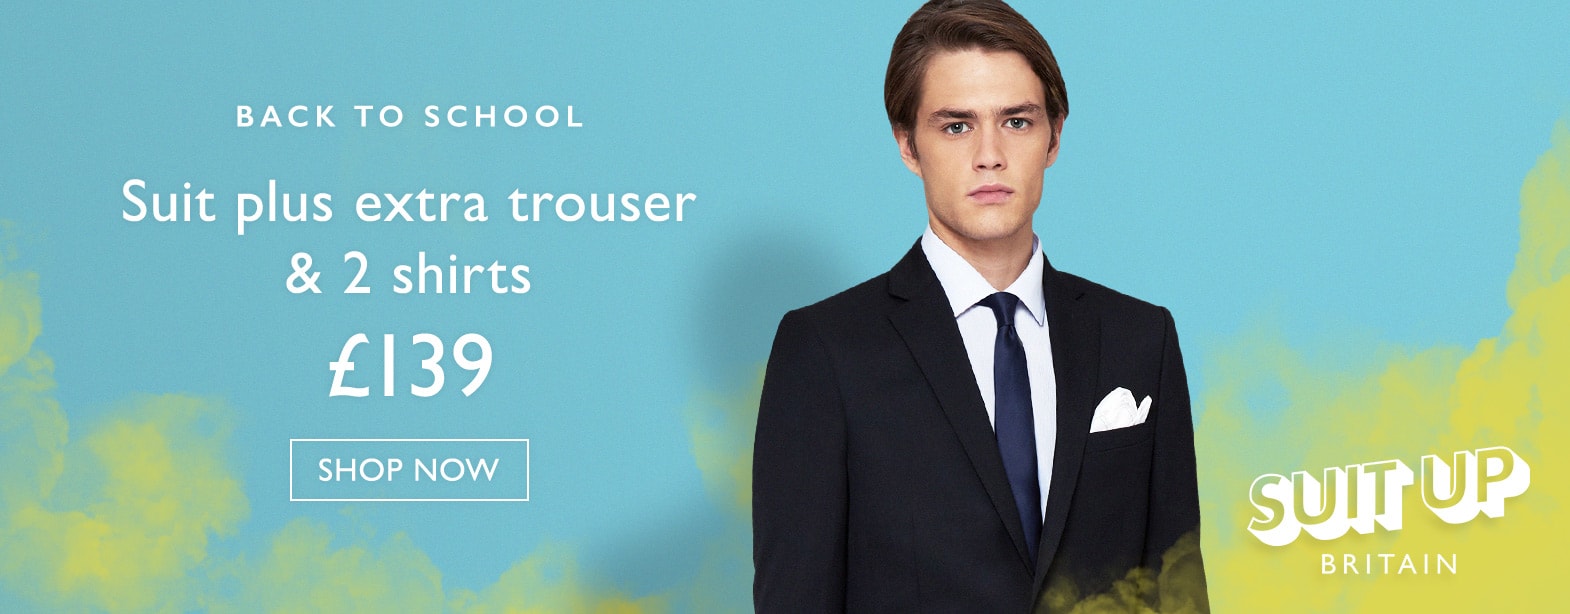 Moss Bros Moss Bros: Back to School promotion - suit plus extra trousers plus two shirts for £139